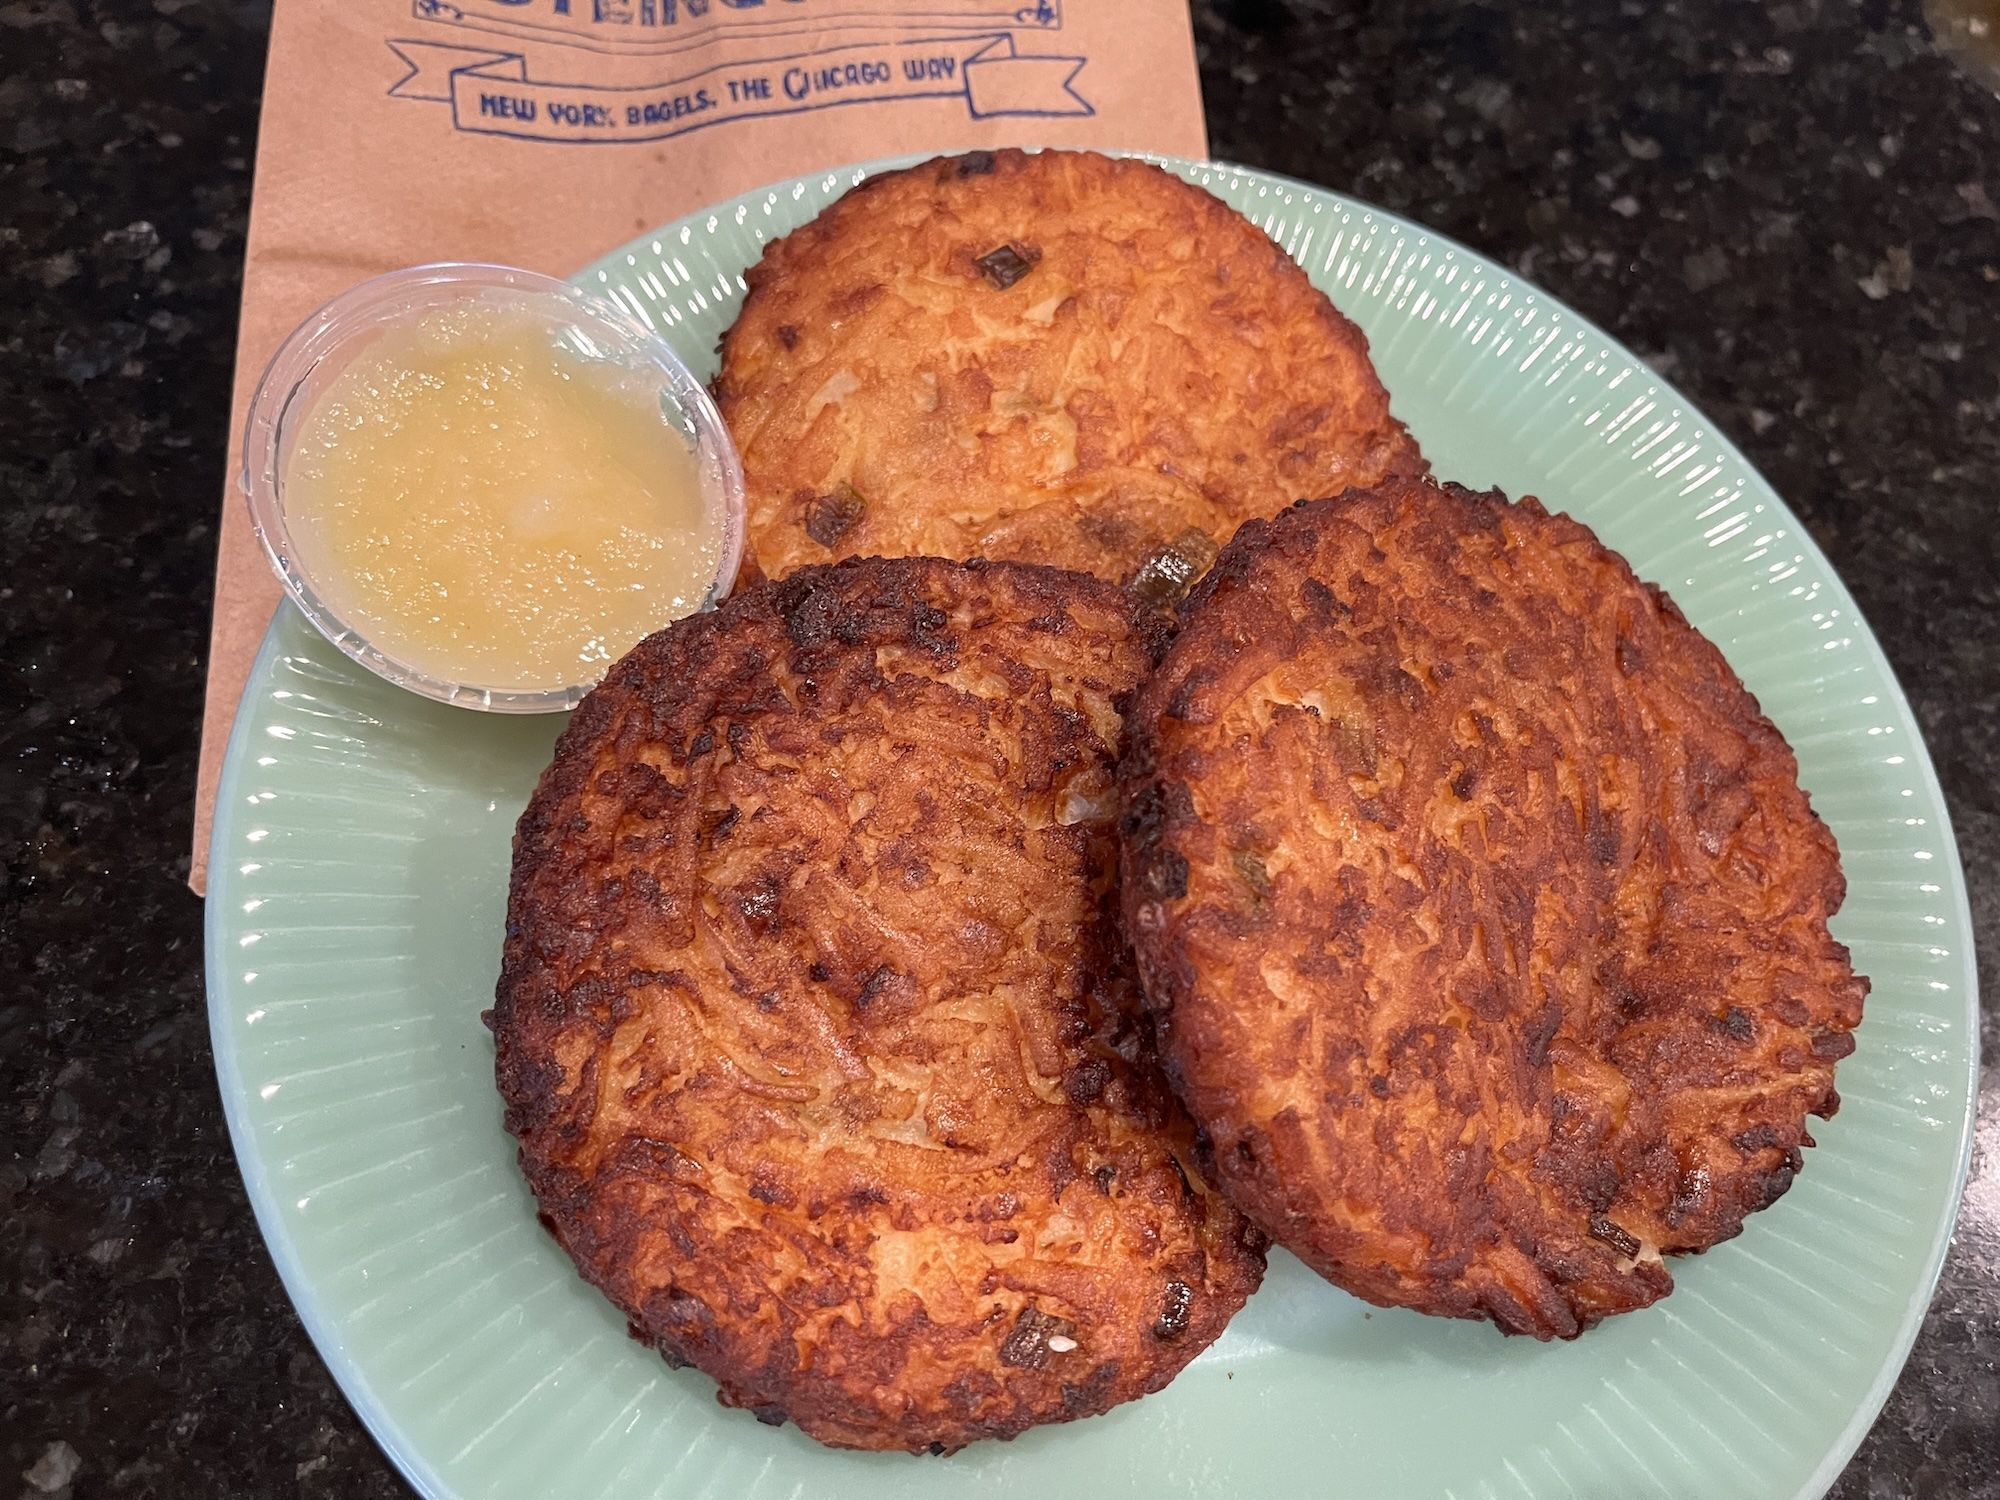 Three round potato pancakes on green plate with cup of applesauce.